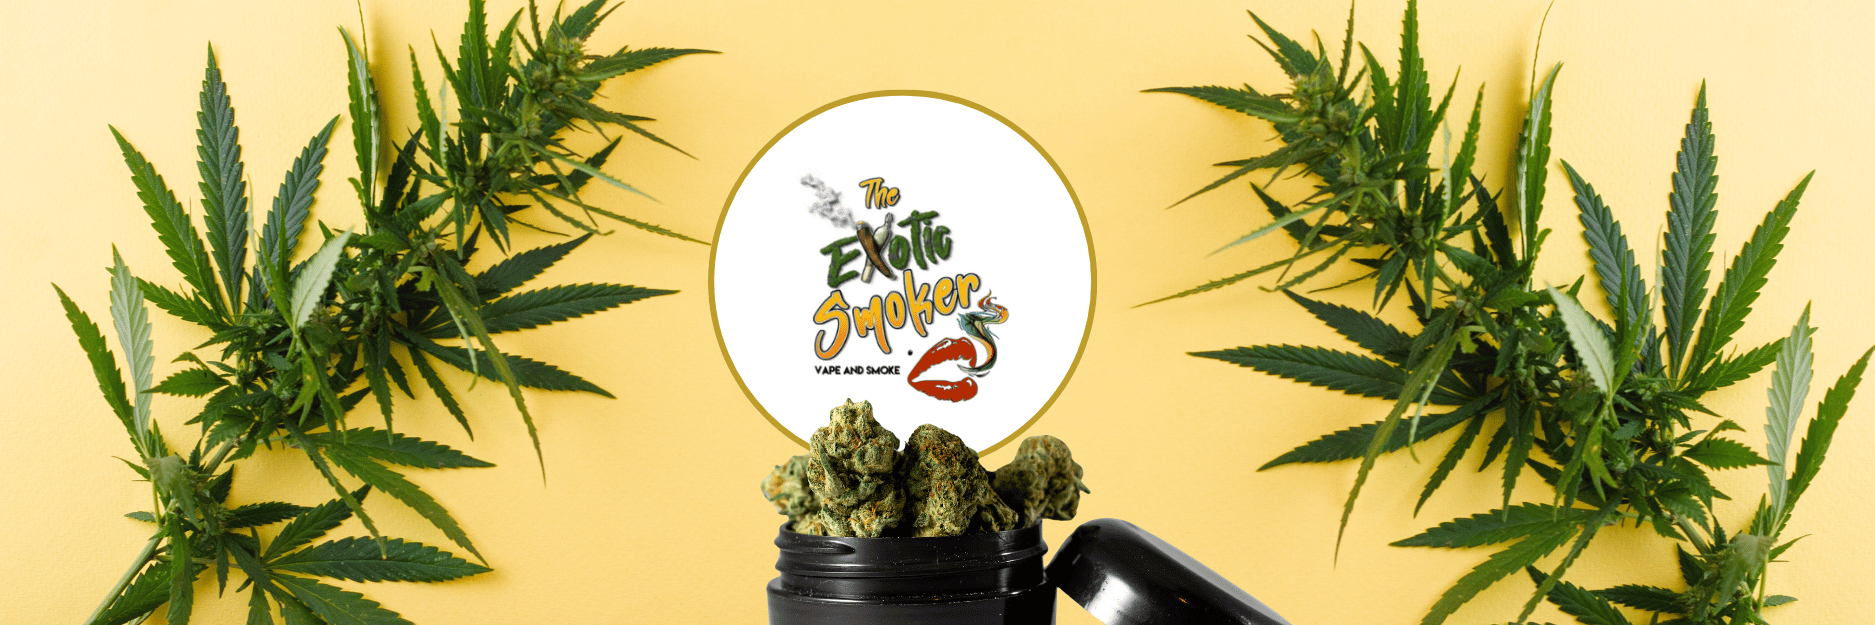 The Exotic Smoker Vape and Smoke Shop logo in the center with two hemp stocks framing the image and buds of hemp flower in a round black container